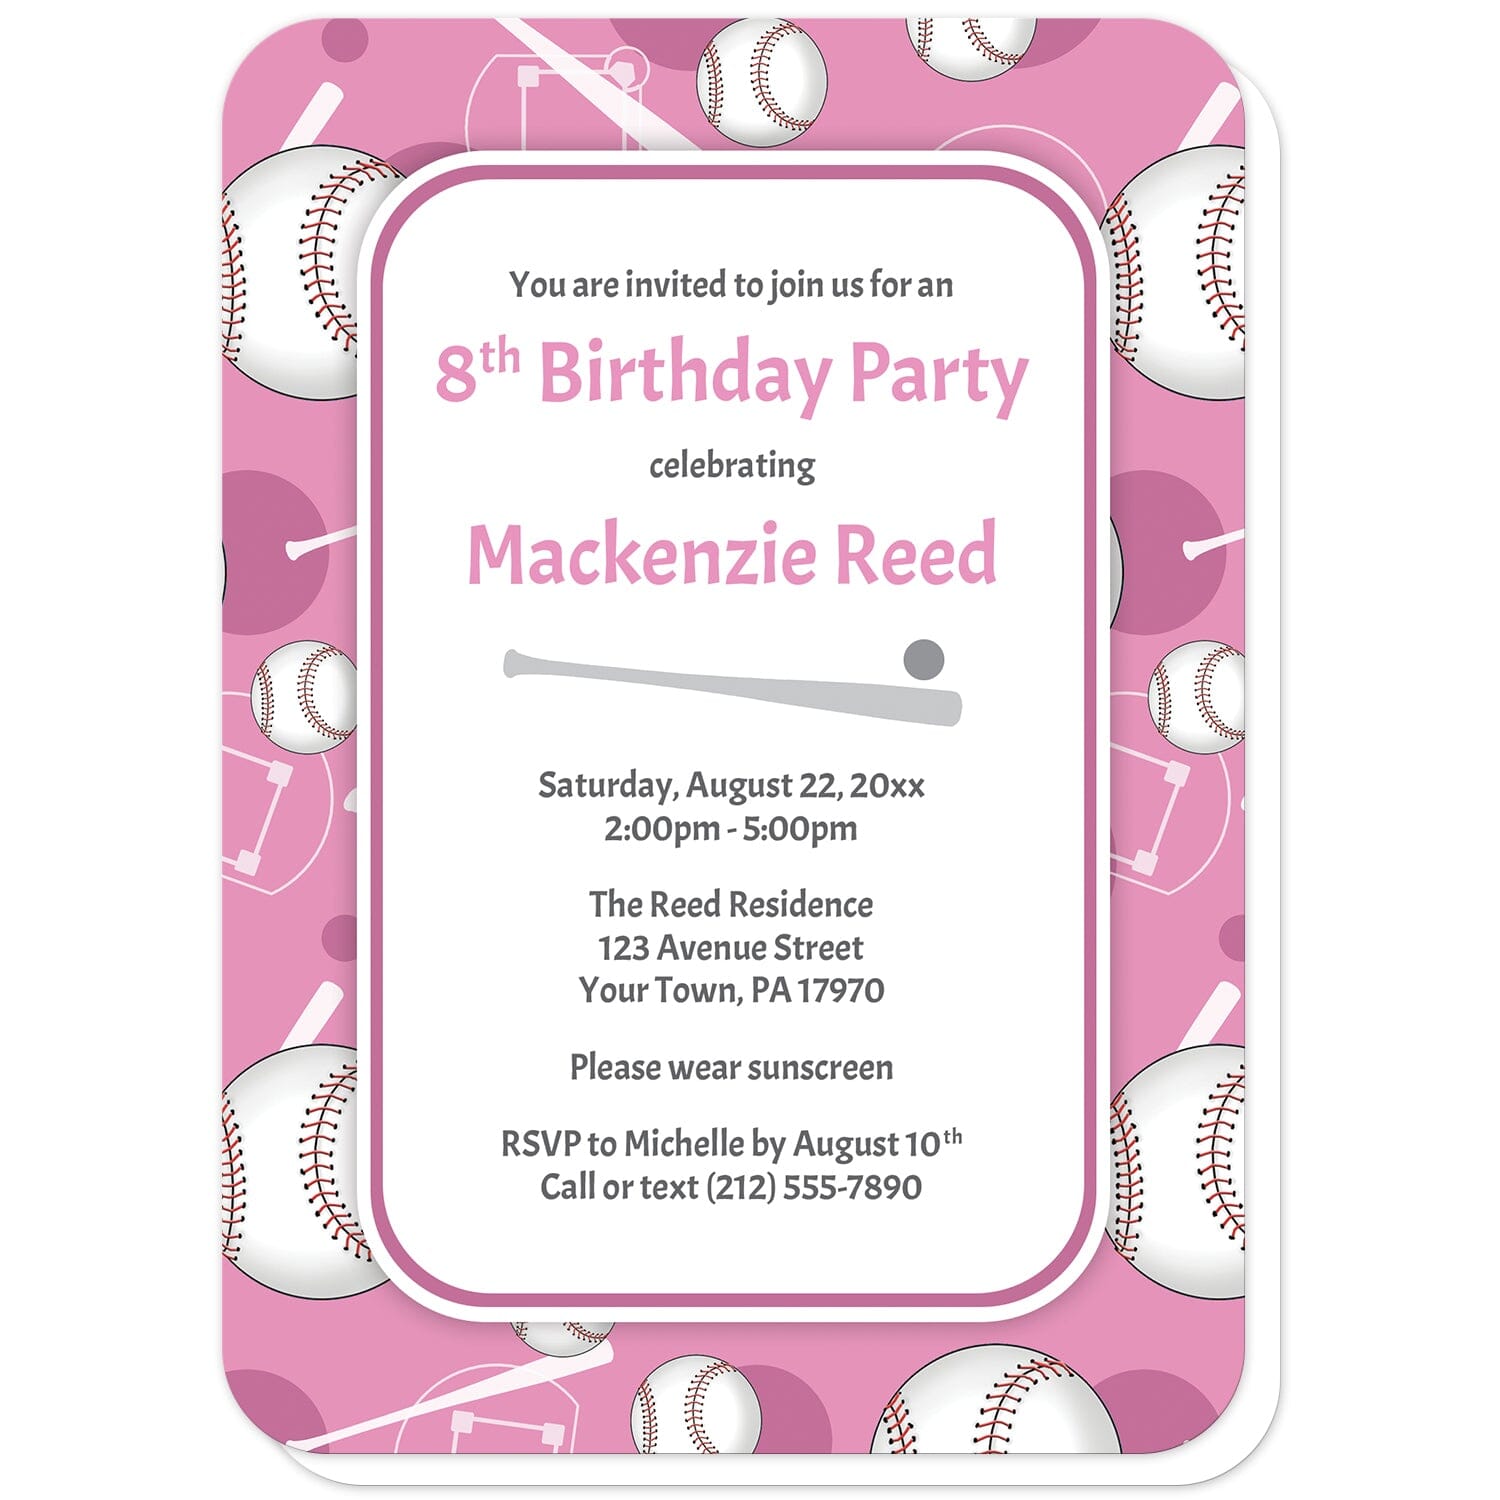 Baseball Themed Pink Pattern Birthday Party Invitations (with rounded corners) at Artistically Invited. Baseball themed pink pattern birthday party invitations for any age or milestone that are uniquely illustrated with a baseball pattern with baseballs, baseball bats, and baseball diamonds, over a pink background color. Your personalized birthday party details are custom printed in pink and gray over white in the center. 